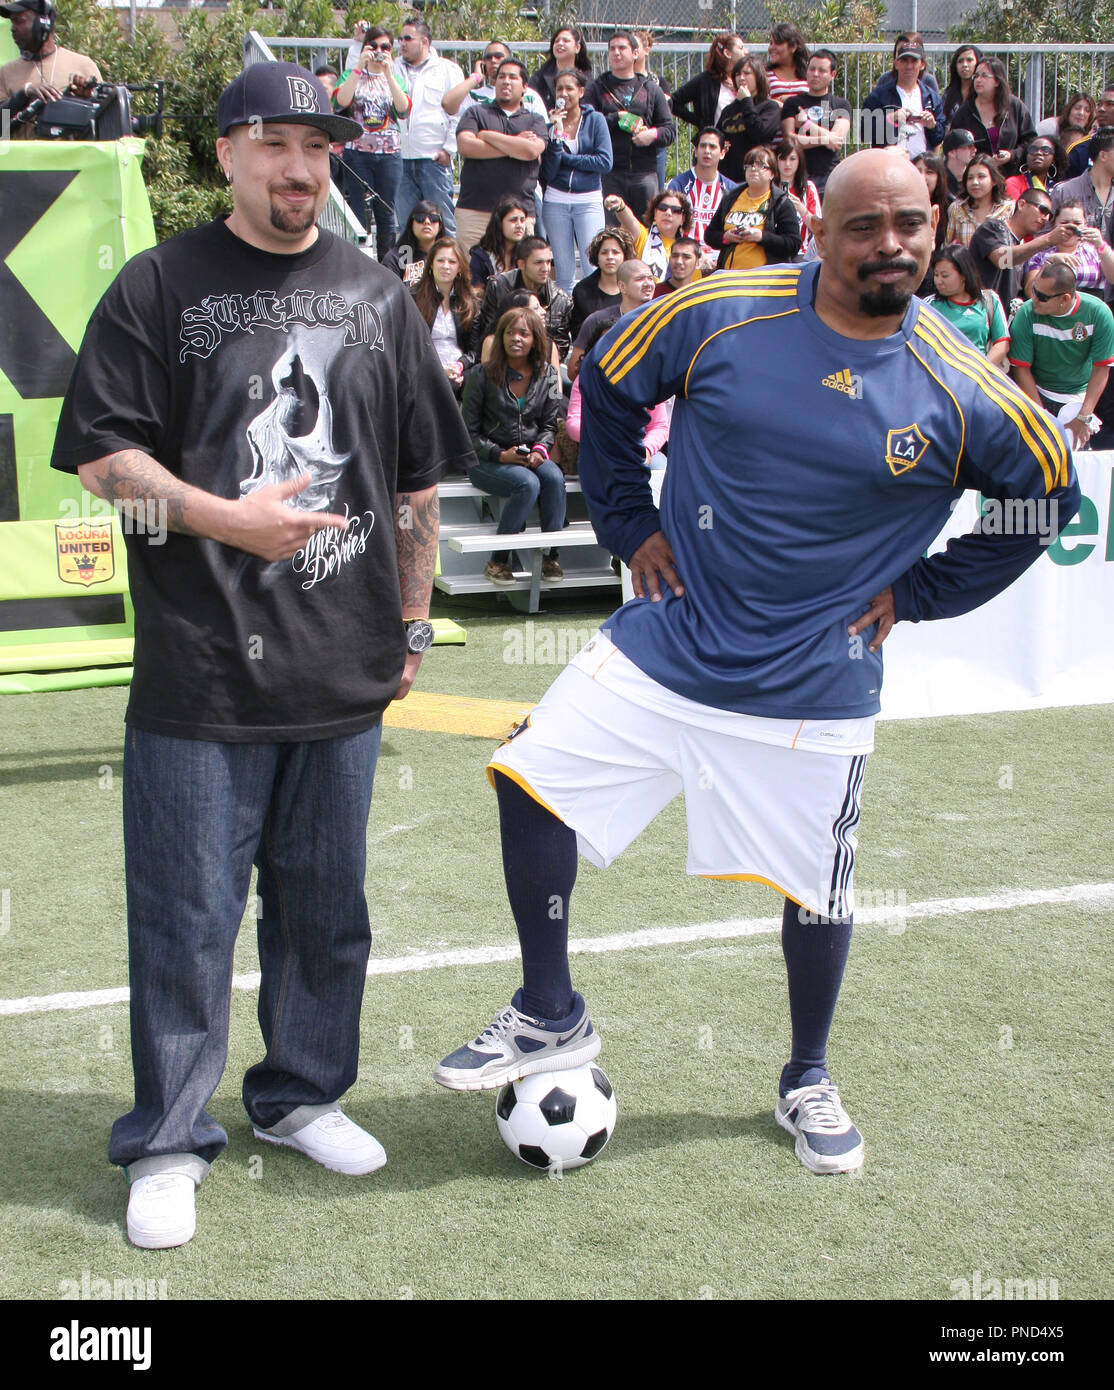 (l-r) B-Real and Sen Dog of Cypress Hillat the MTV Tr3s Rock N' Gol TV special taping held at the Home Depot Center in Carson, CA on Wednesday, March 31, 2010. ROCK N’ GOL airs on June 3rd at 9:00pm (EST) on MTV Tr3s with an additional MTV2 broadcast post premiere. Photo by Pedro Ulayan Pacific Rim Photo Press. /PictureLux File Reference # BRealSenDog 01 33110PLX   For Editorial Use Only -  All Rights Reserved Stock Photo